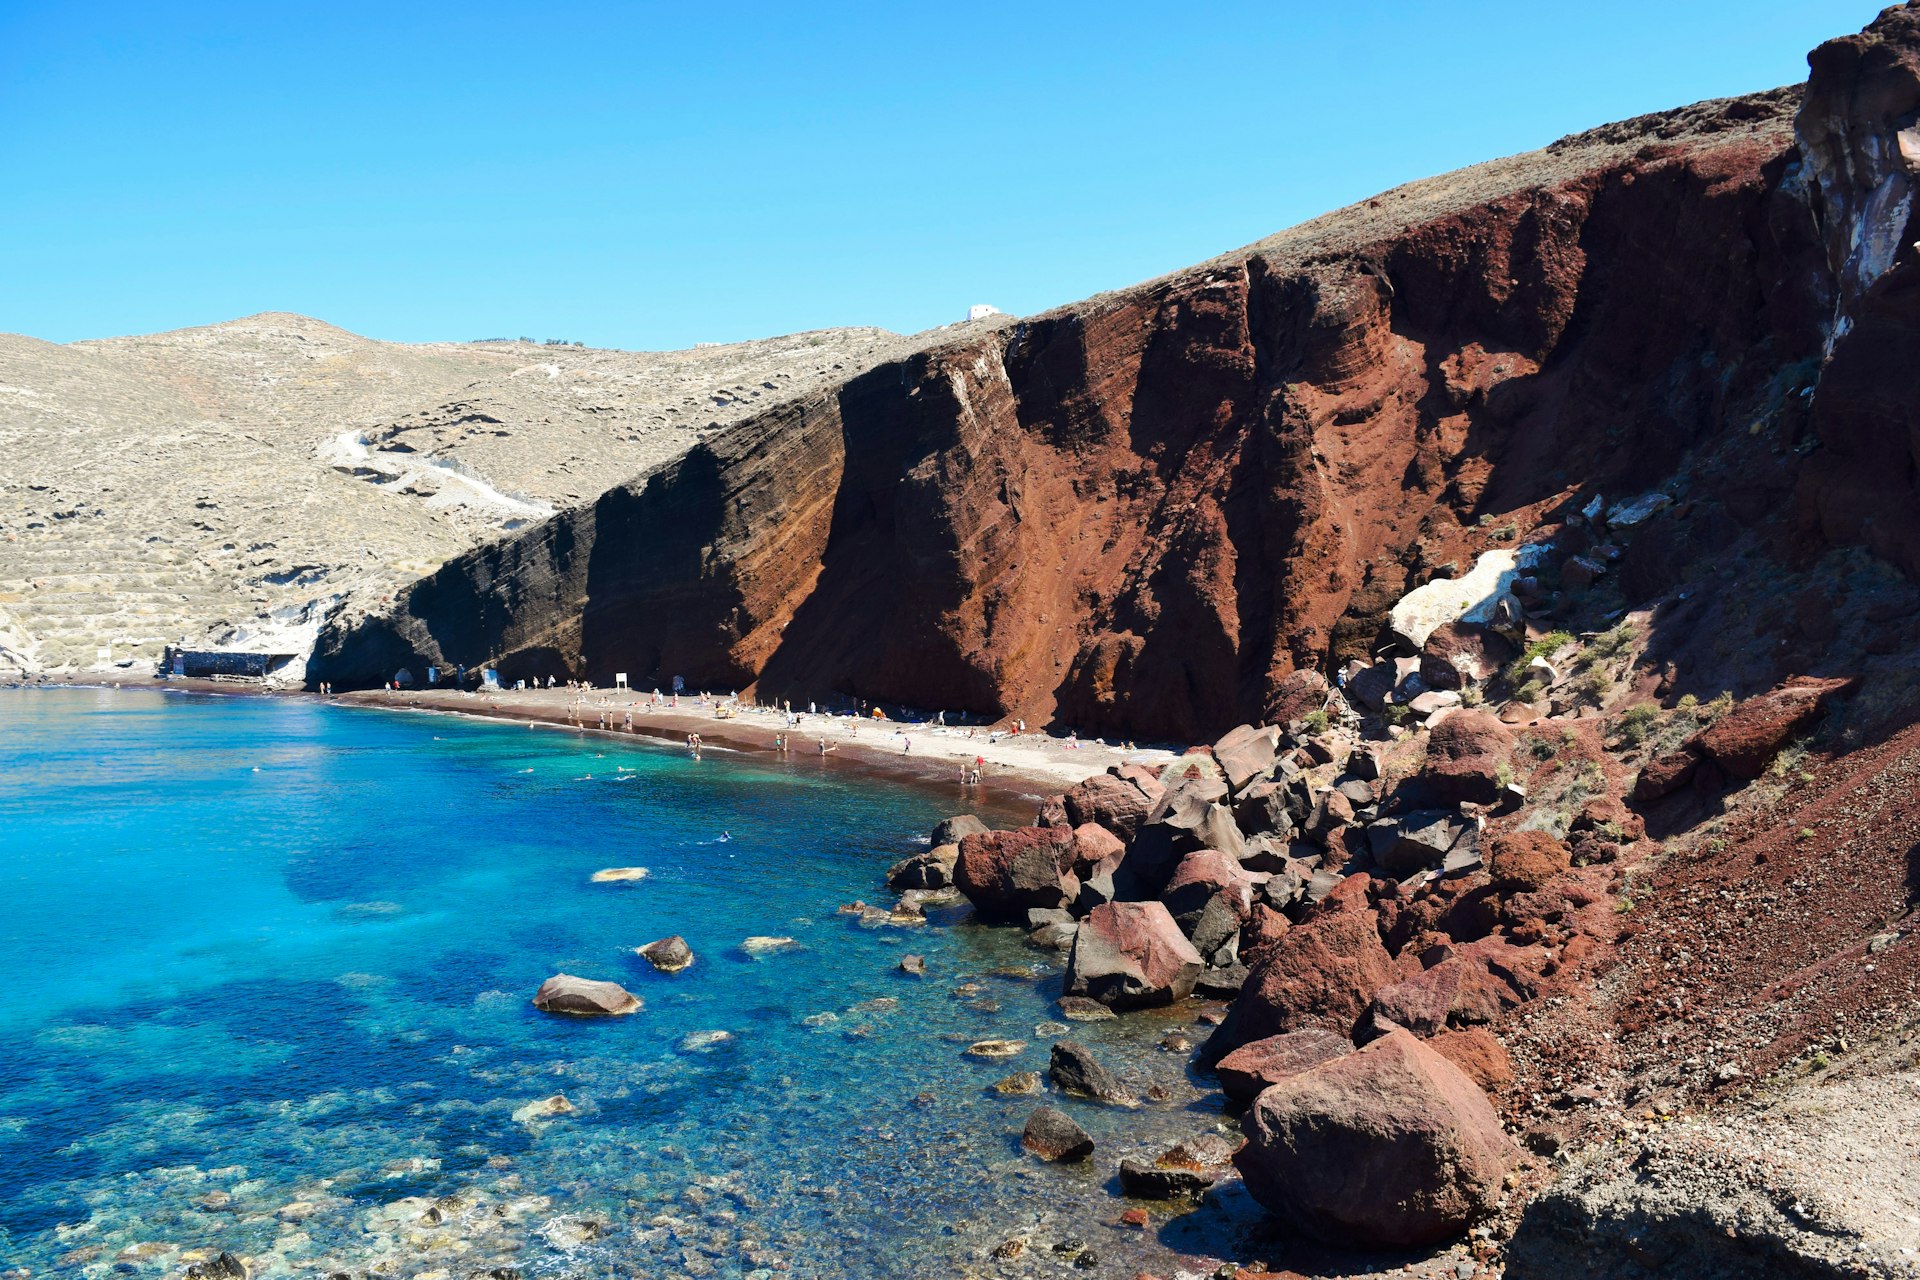 A wide-angled view of Red Beach on the island of Santorini in Greece, which gets its name from the red-coloured cliffs visible behind the thin strip of golden sand.